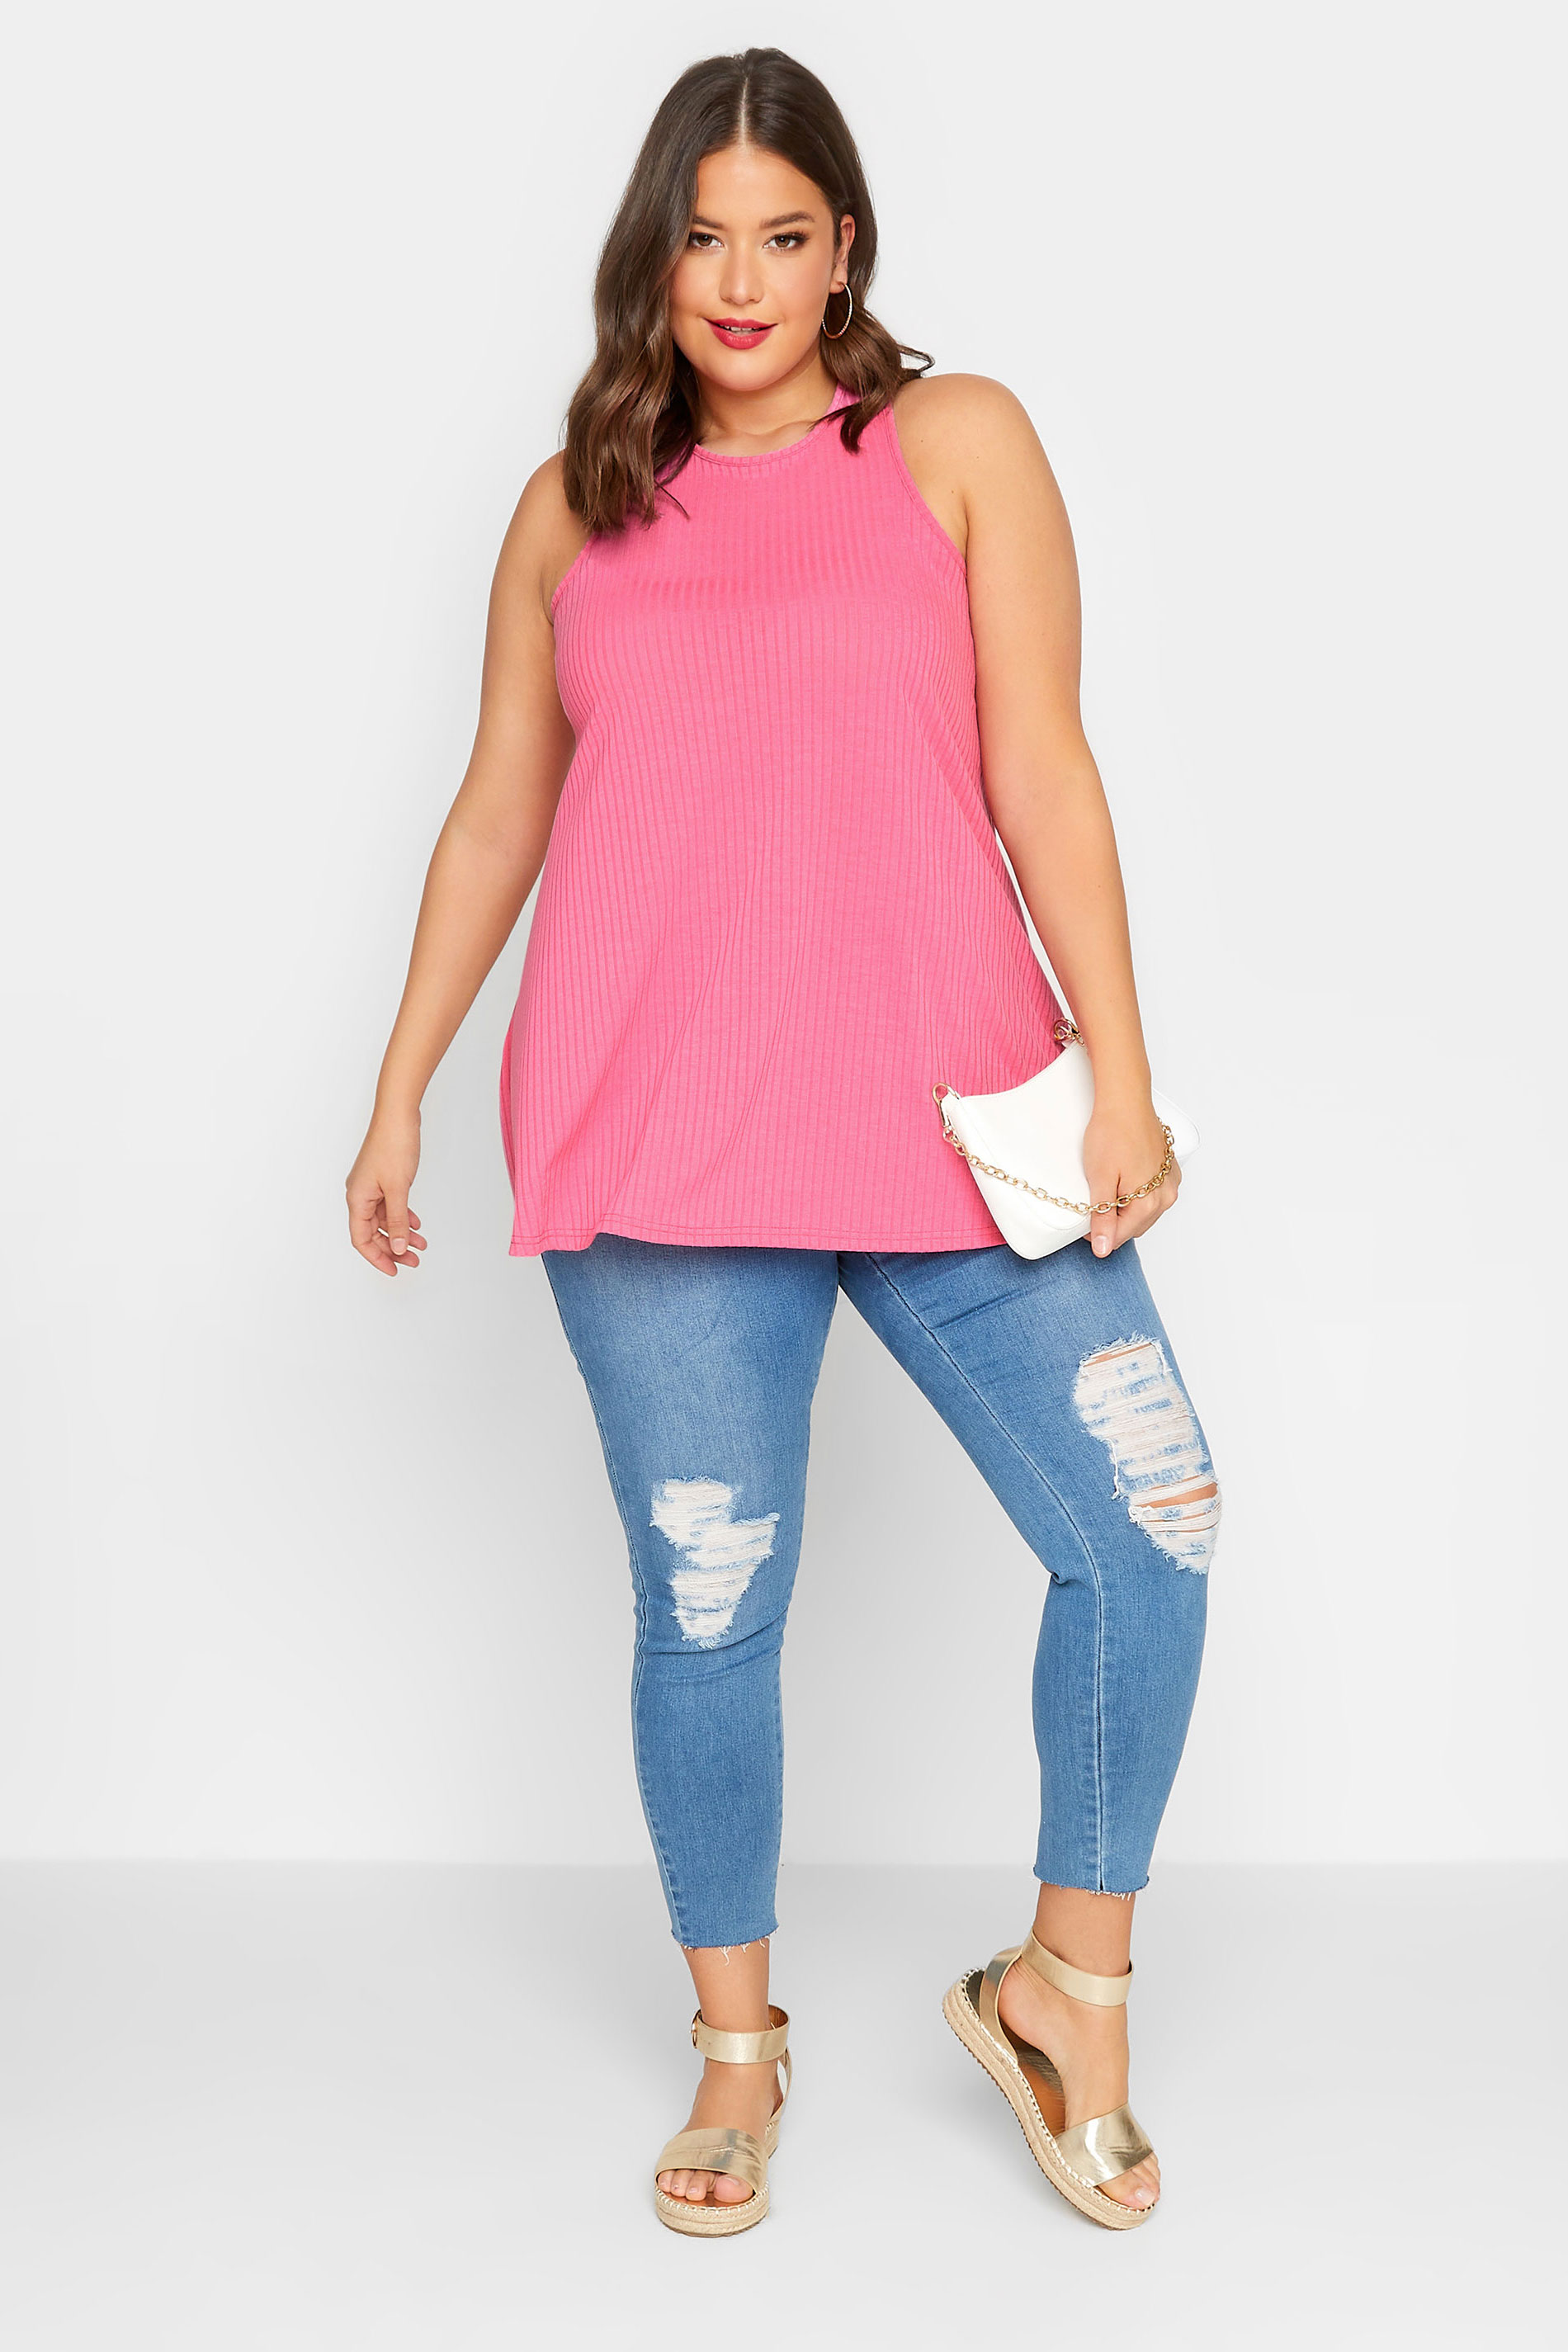 LIMITED COLLECTION Curve Plus Size Pink Ribbed Racer Cami Vest Top | Yours Clothing  2